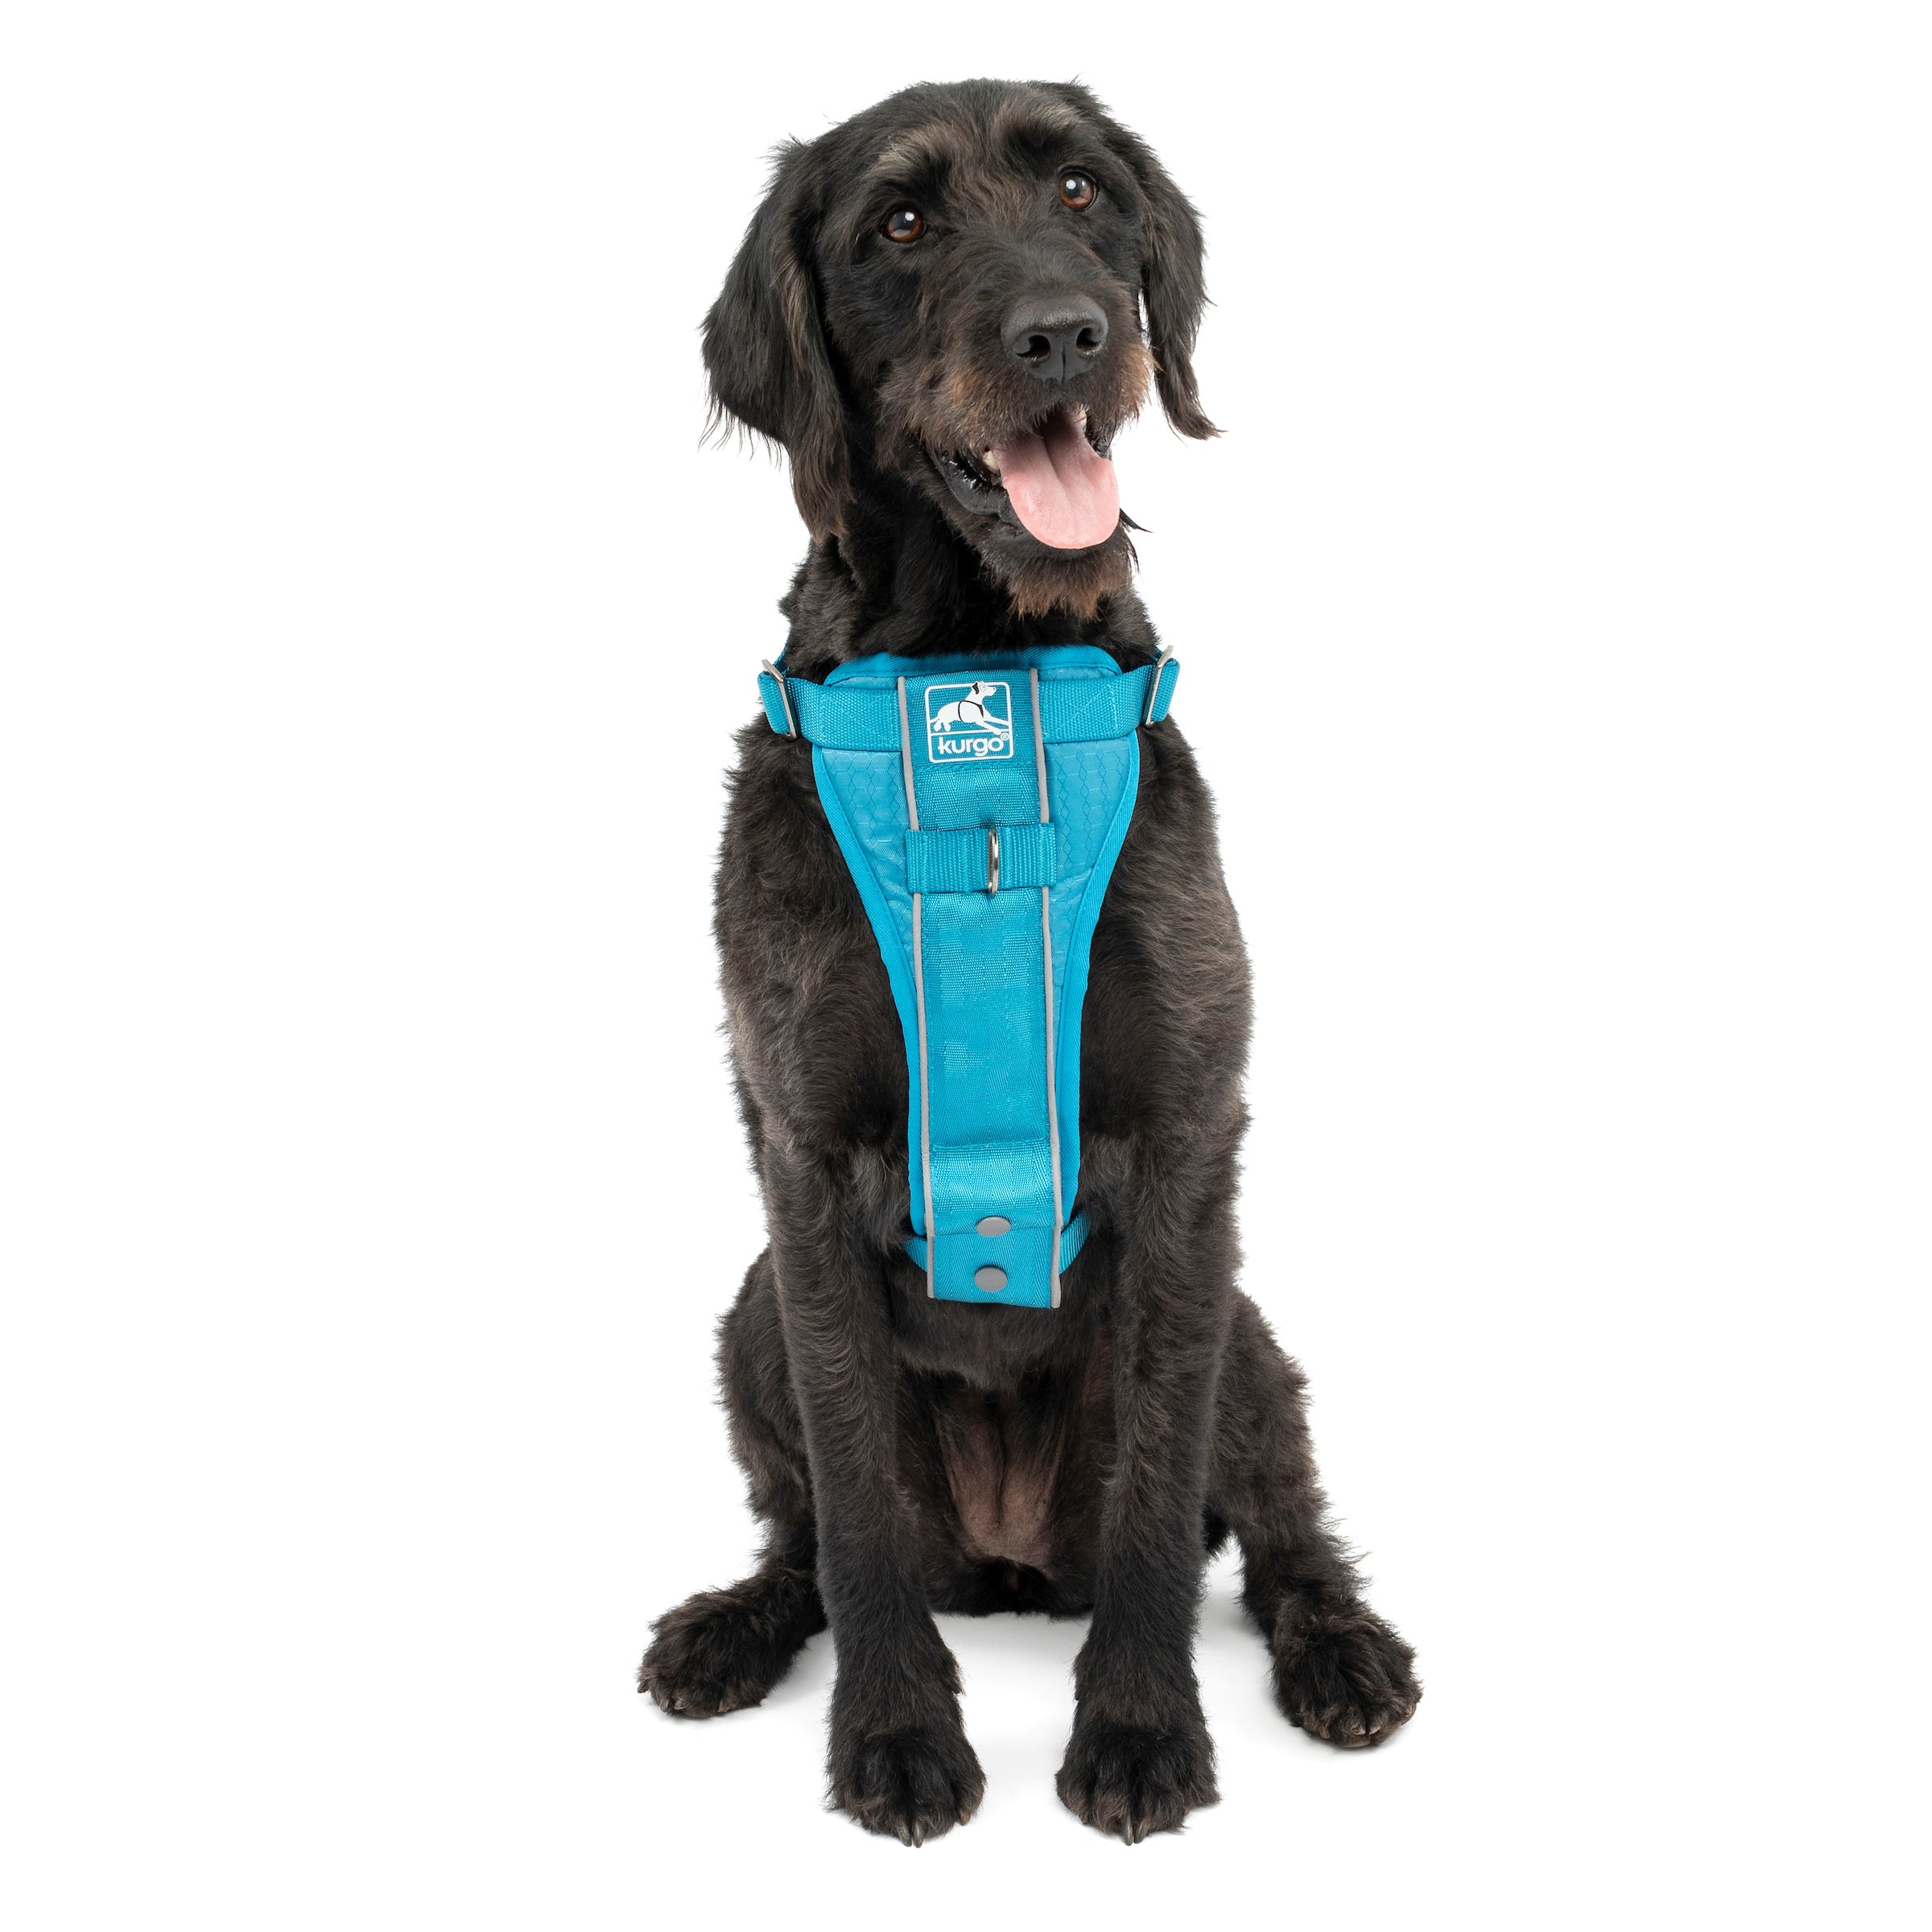 Dog (Pet) Harness Strap Replacement - iFixit Repair Guide